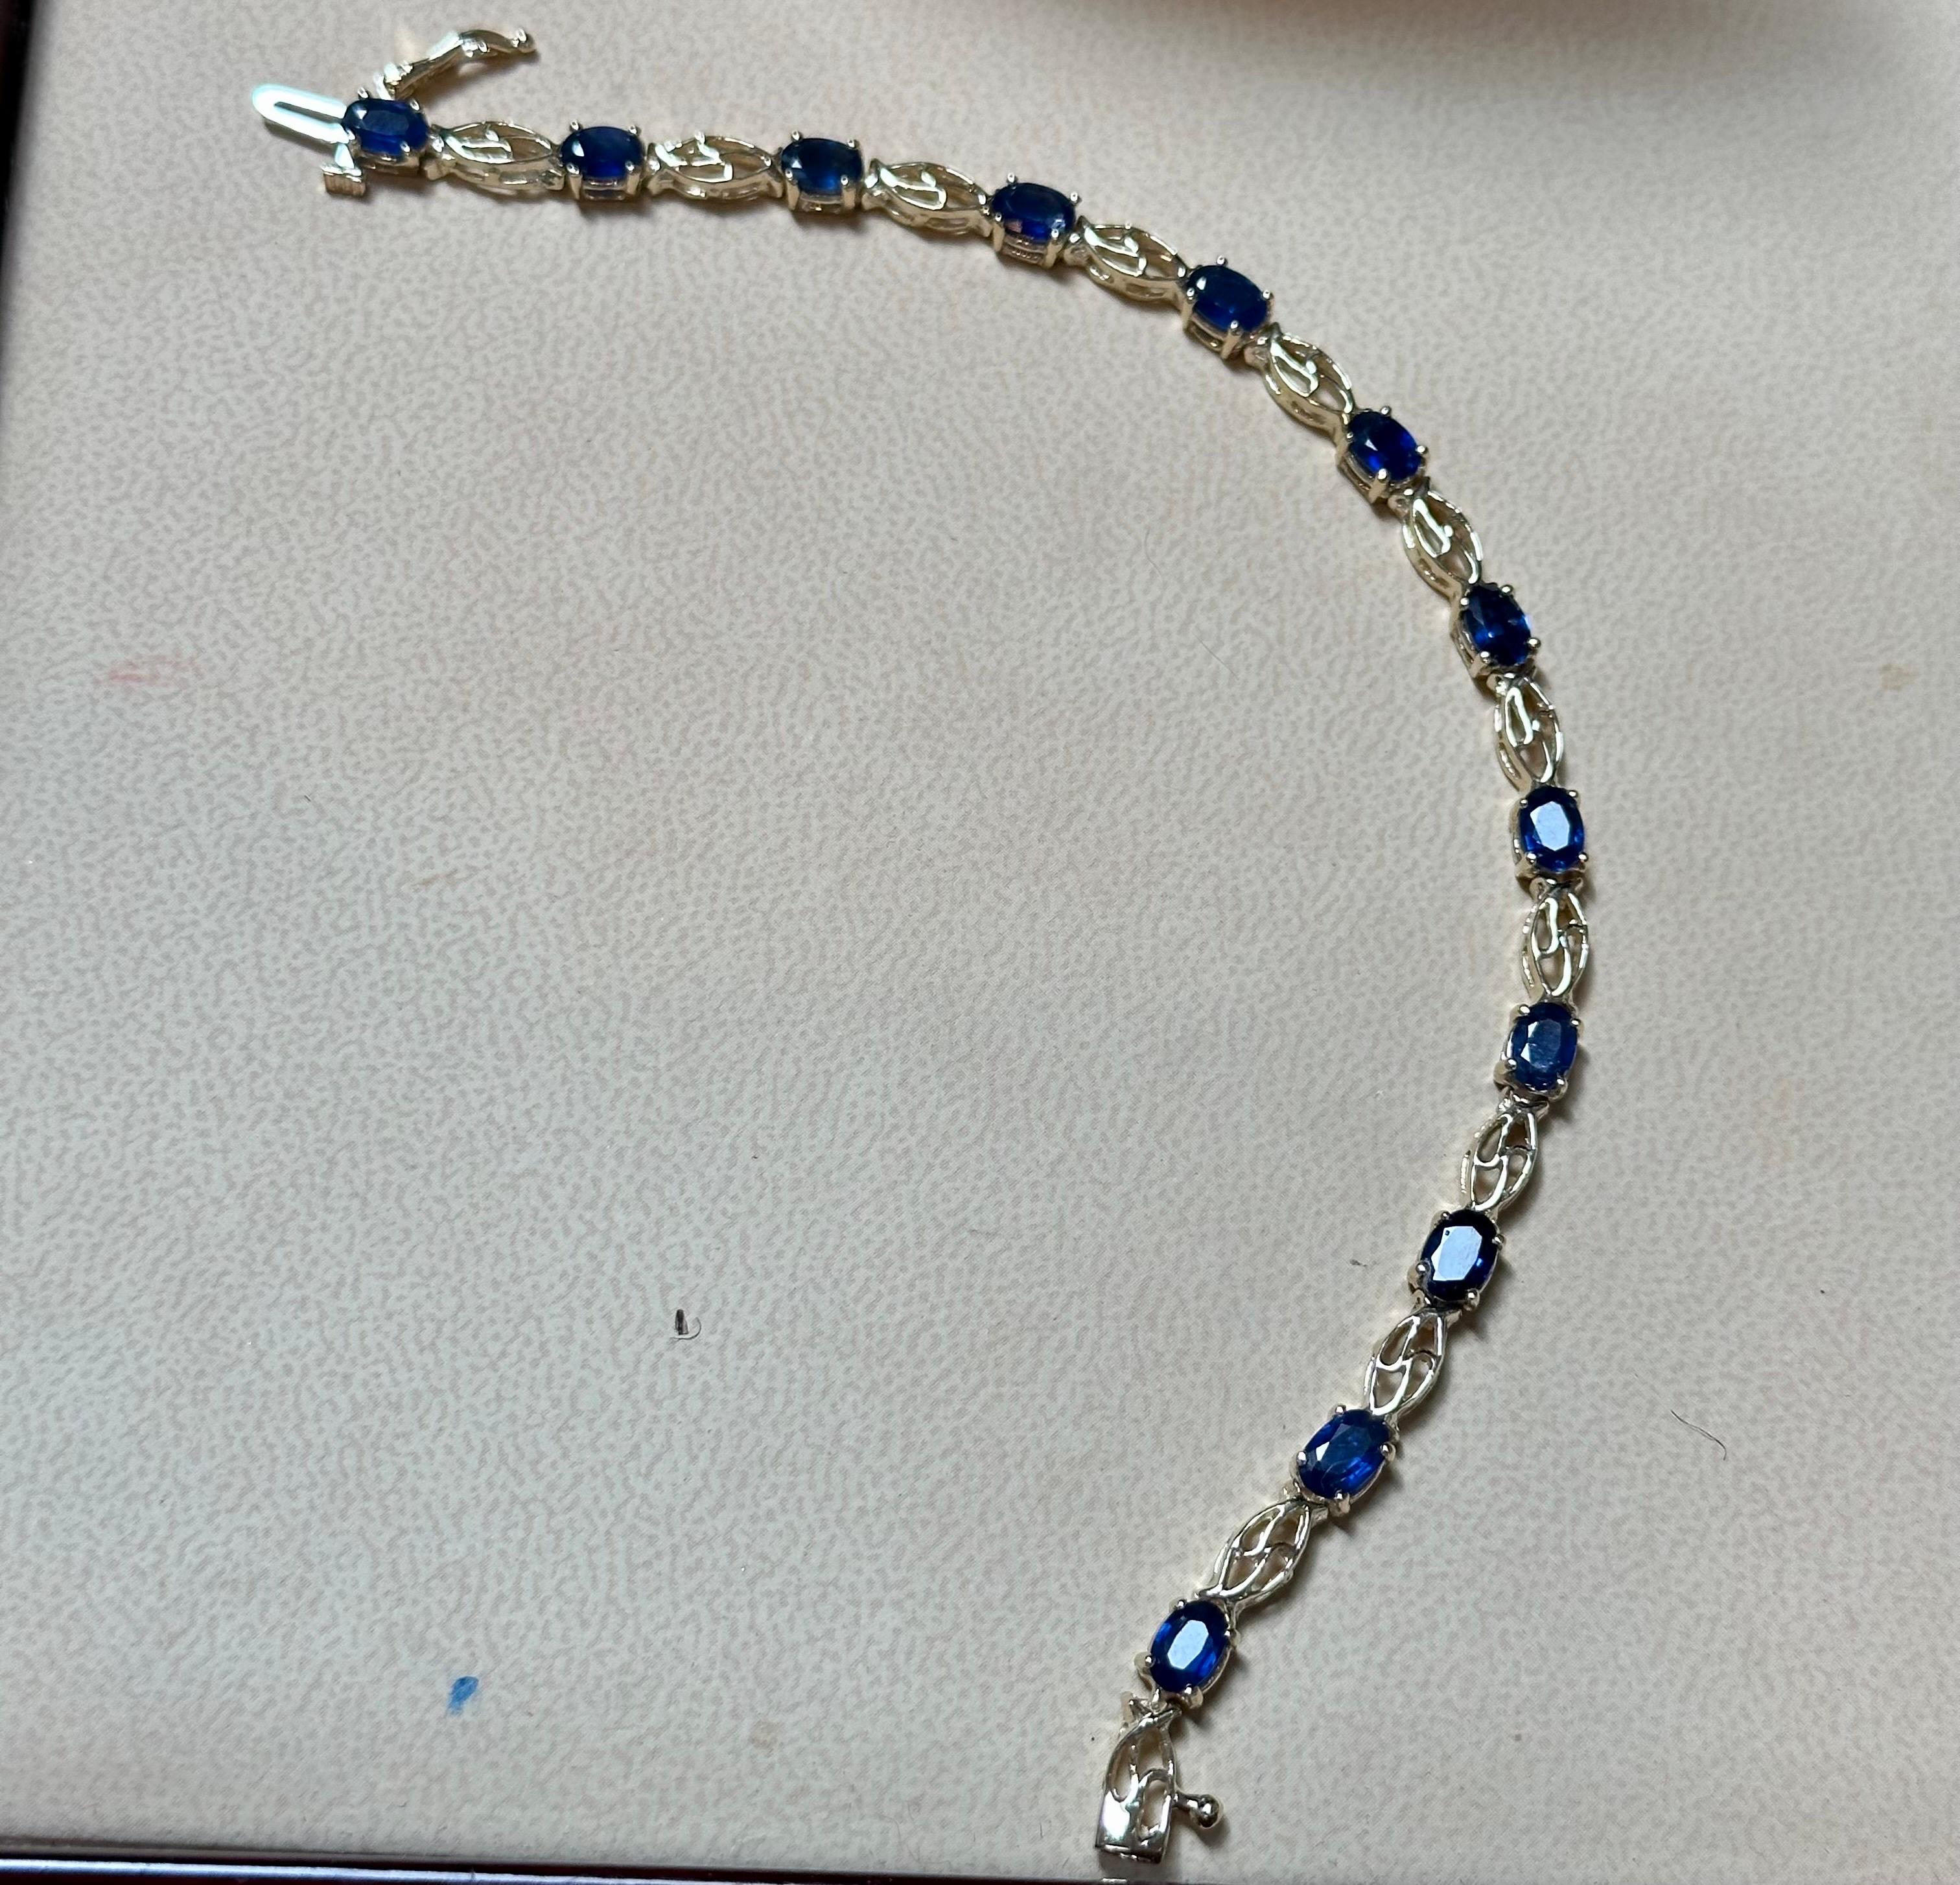 Oval Cut 8Ct Natural Oval Blue Sapphire Tennis Bracelet 14 Karat Yellow Gold, 7 Inch Long For Sale